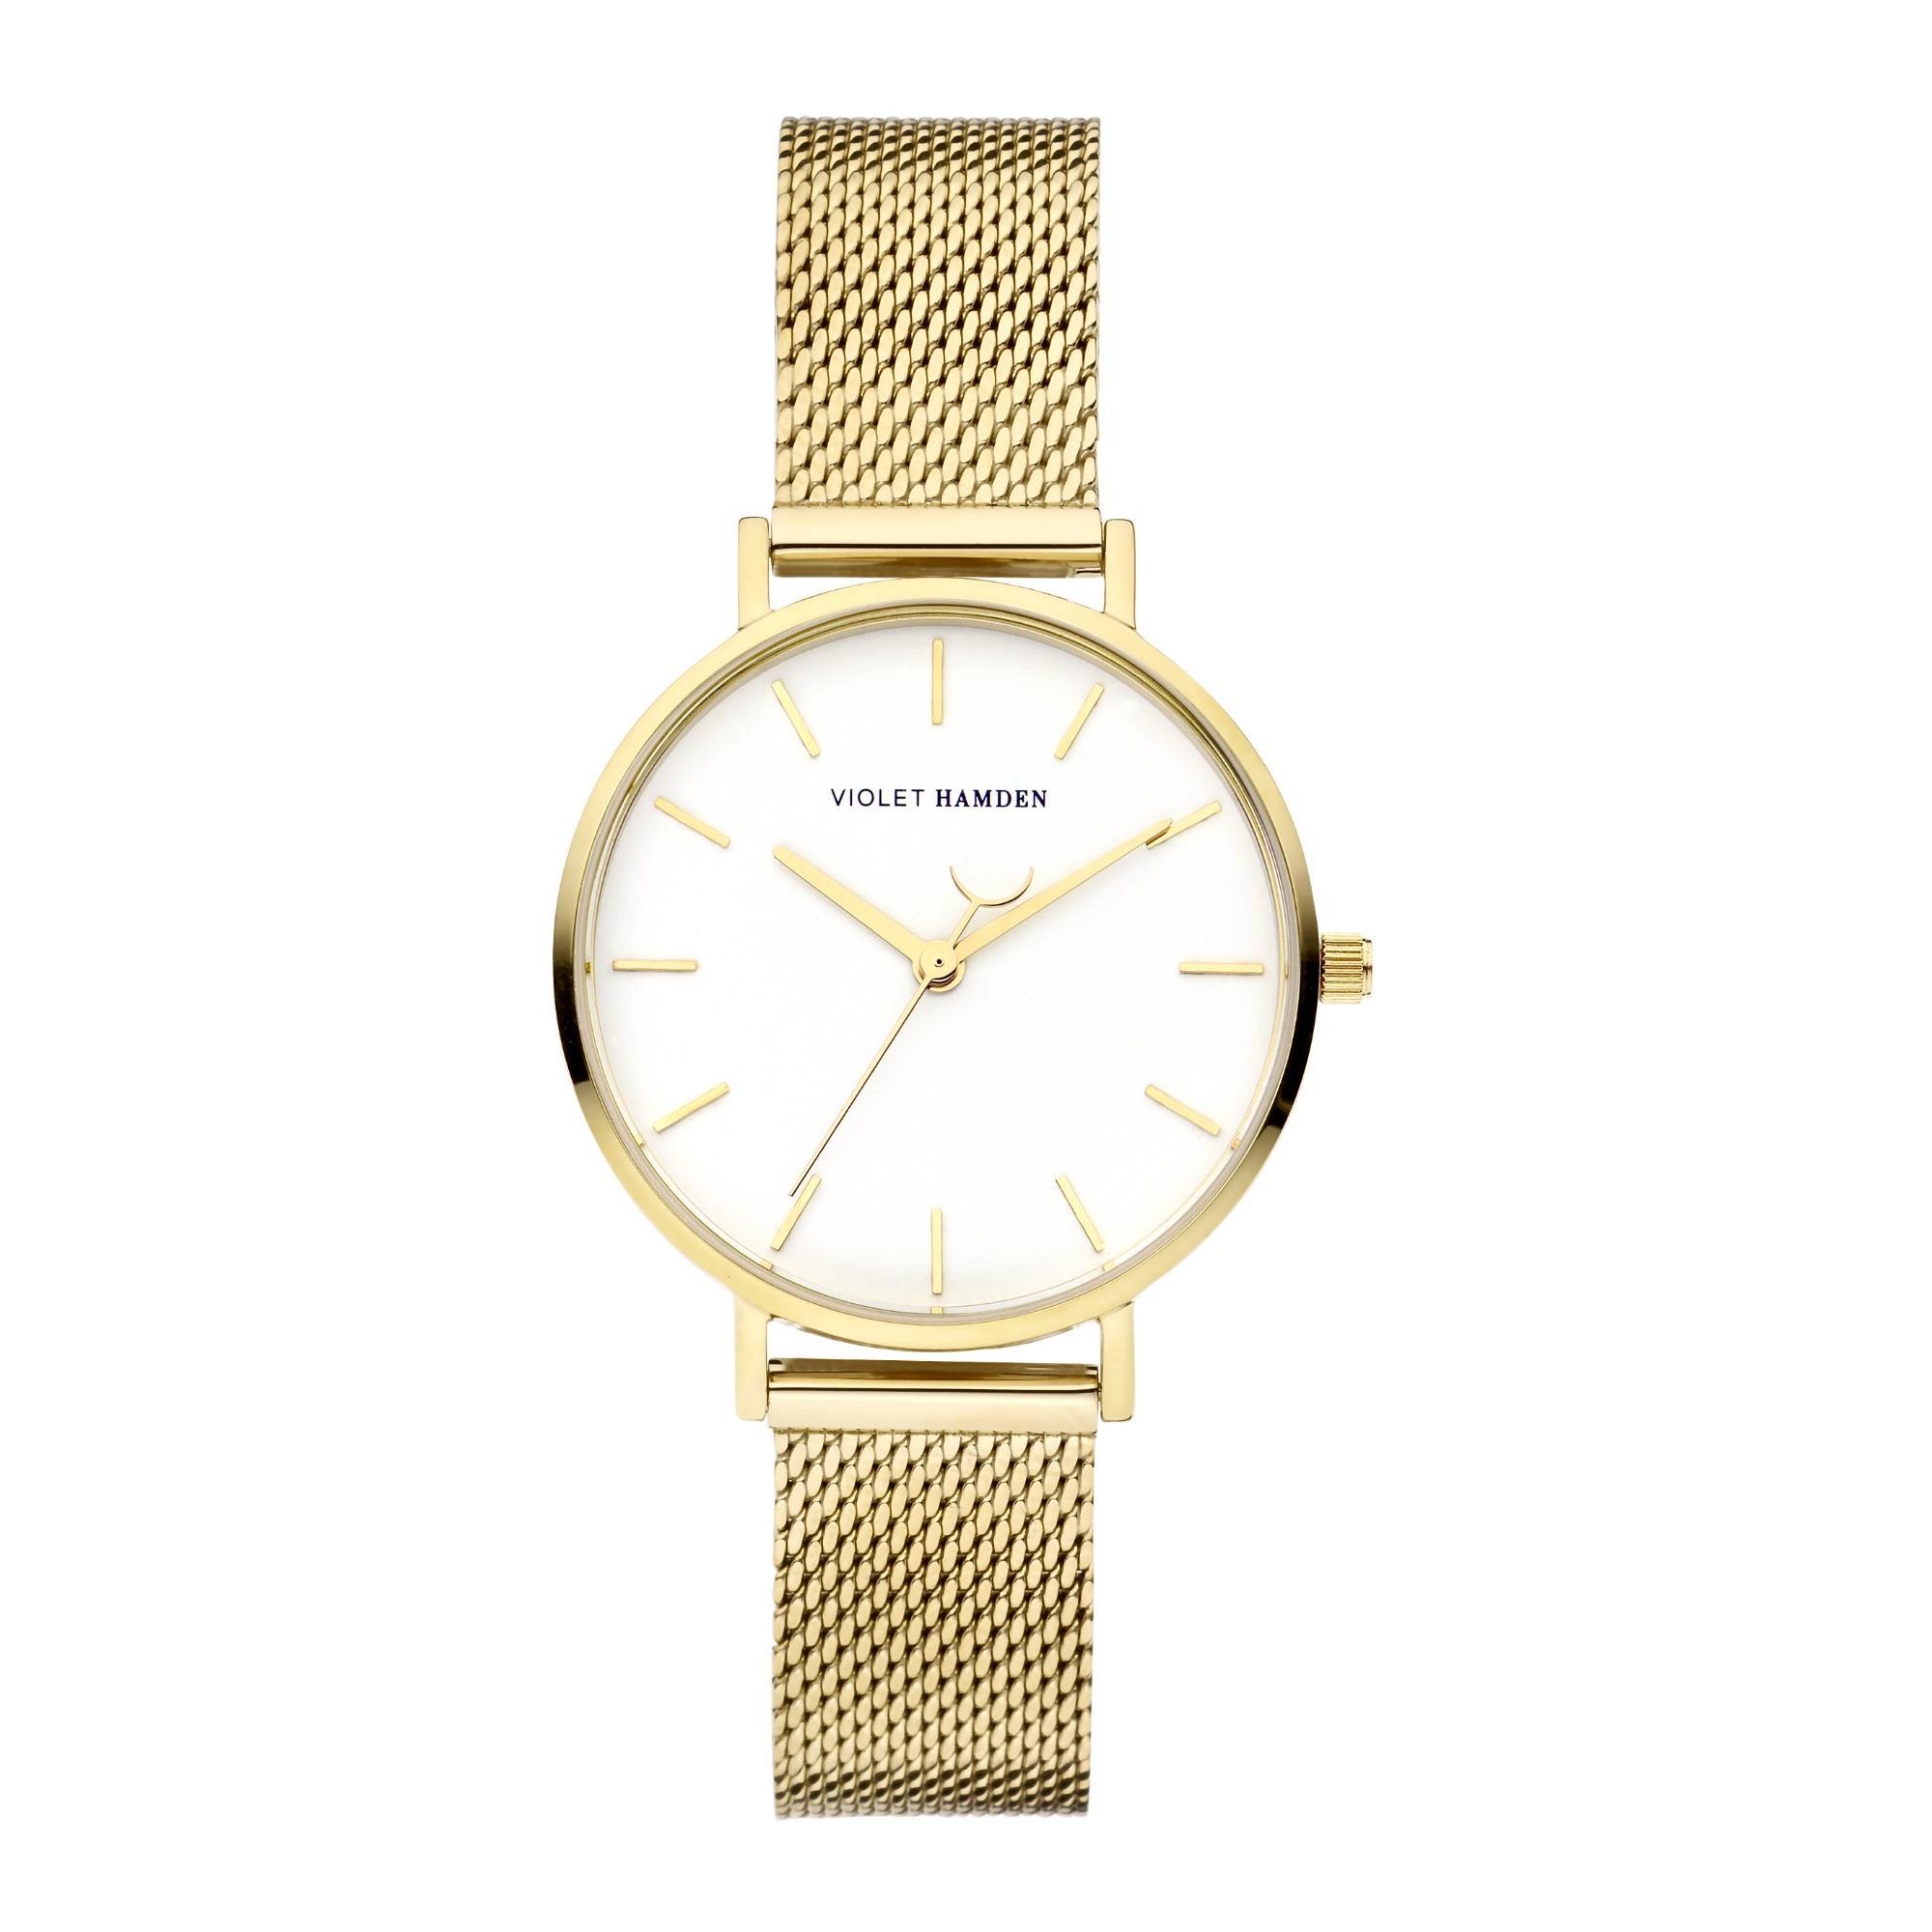 Day & Night round ladies watch gold and white coloured